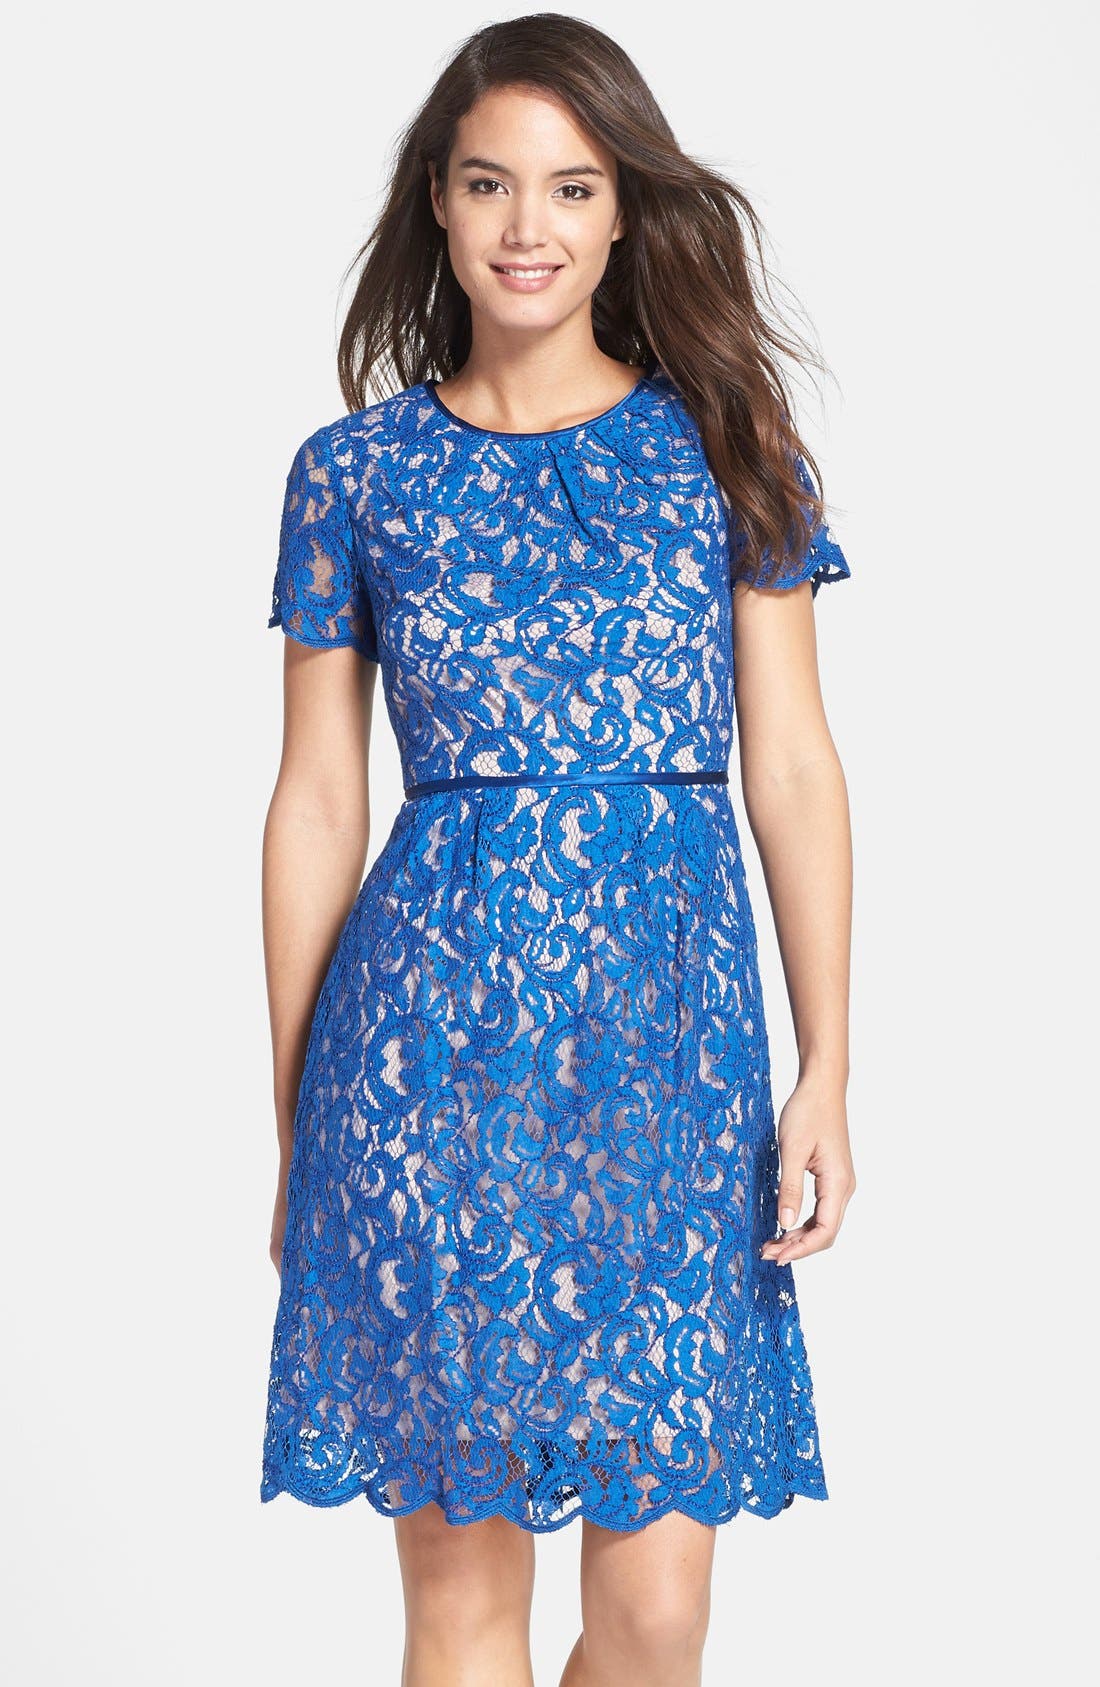 adrianna papell blue lace dress